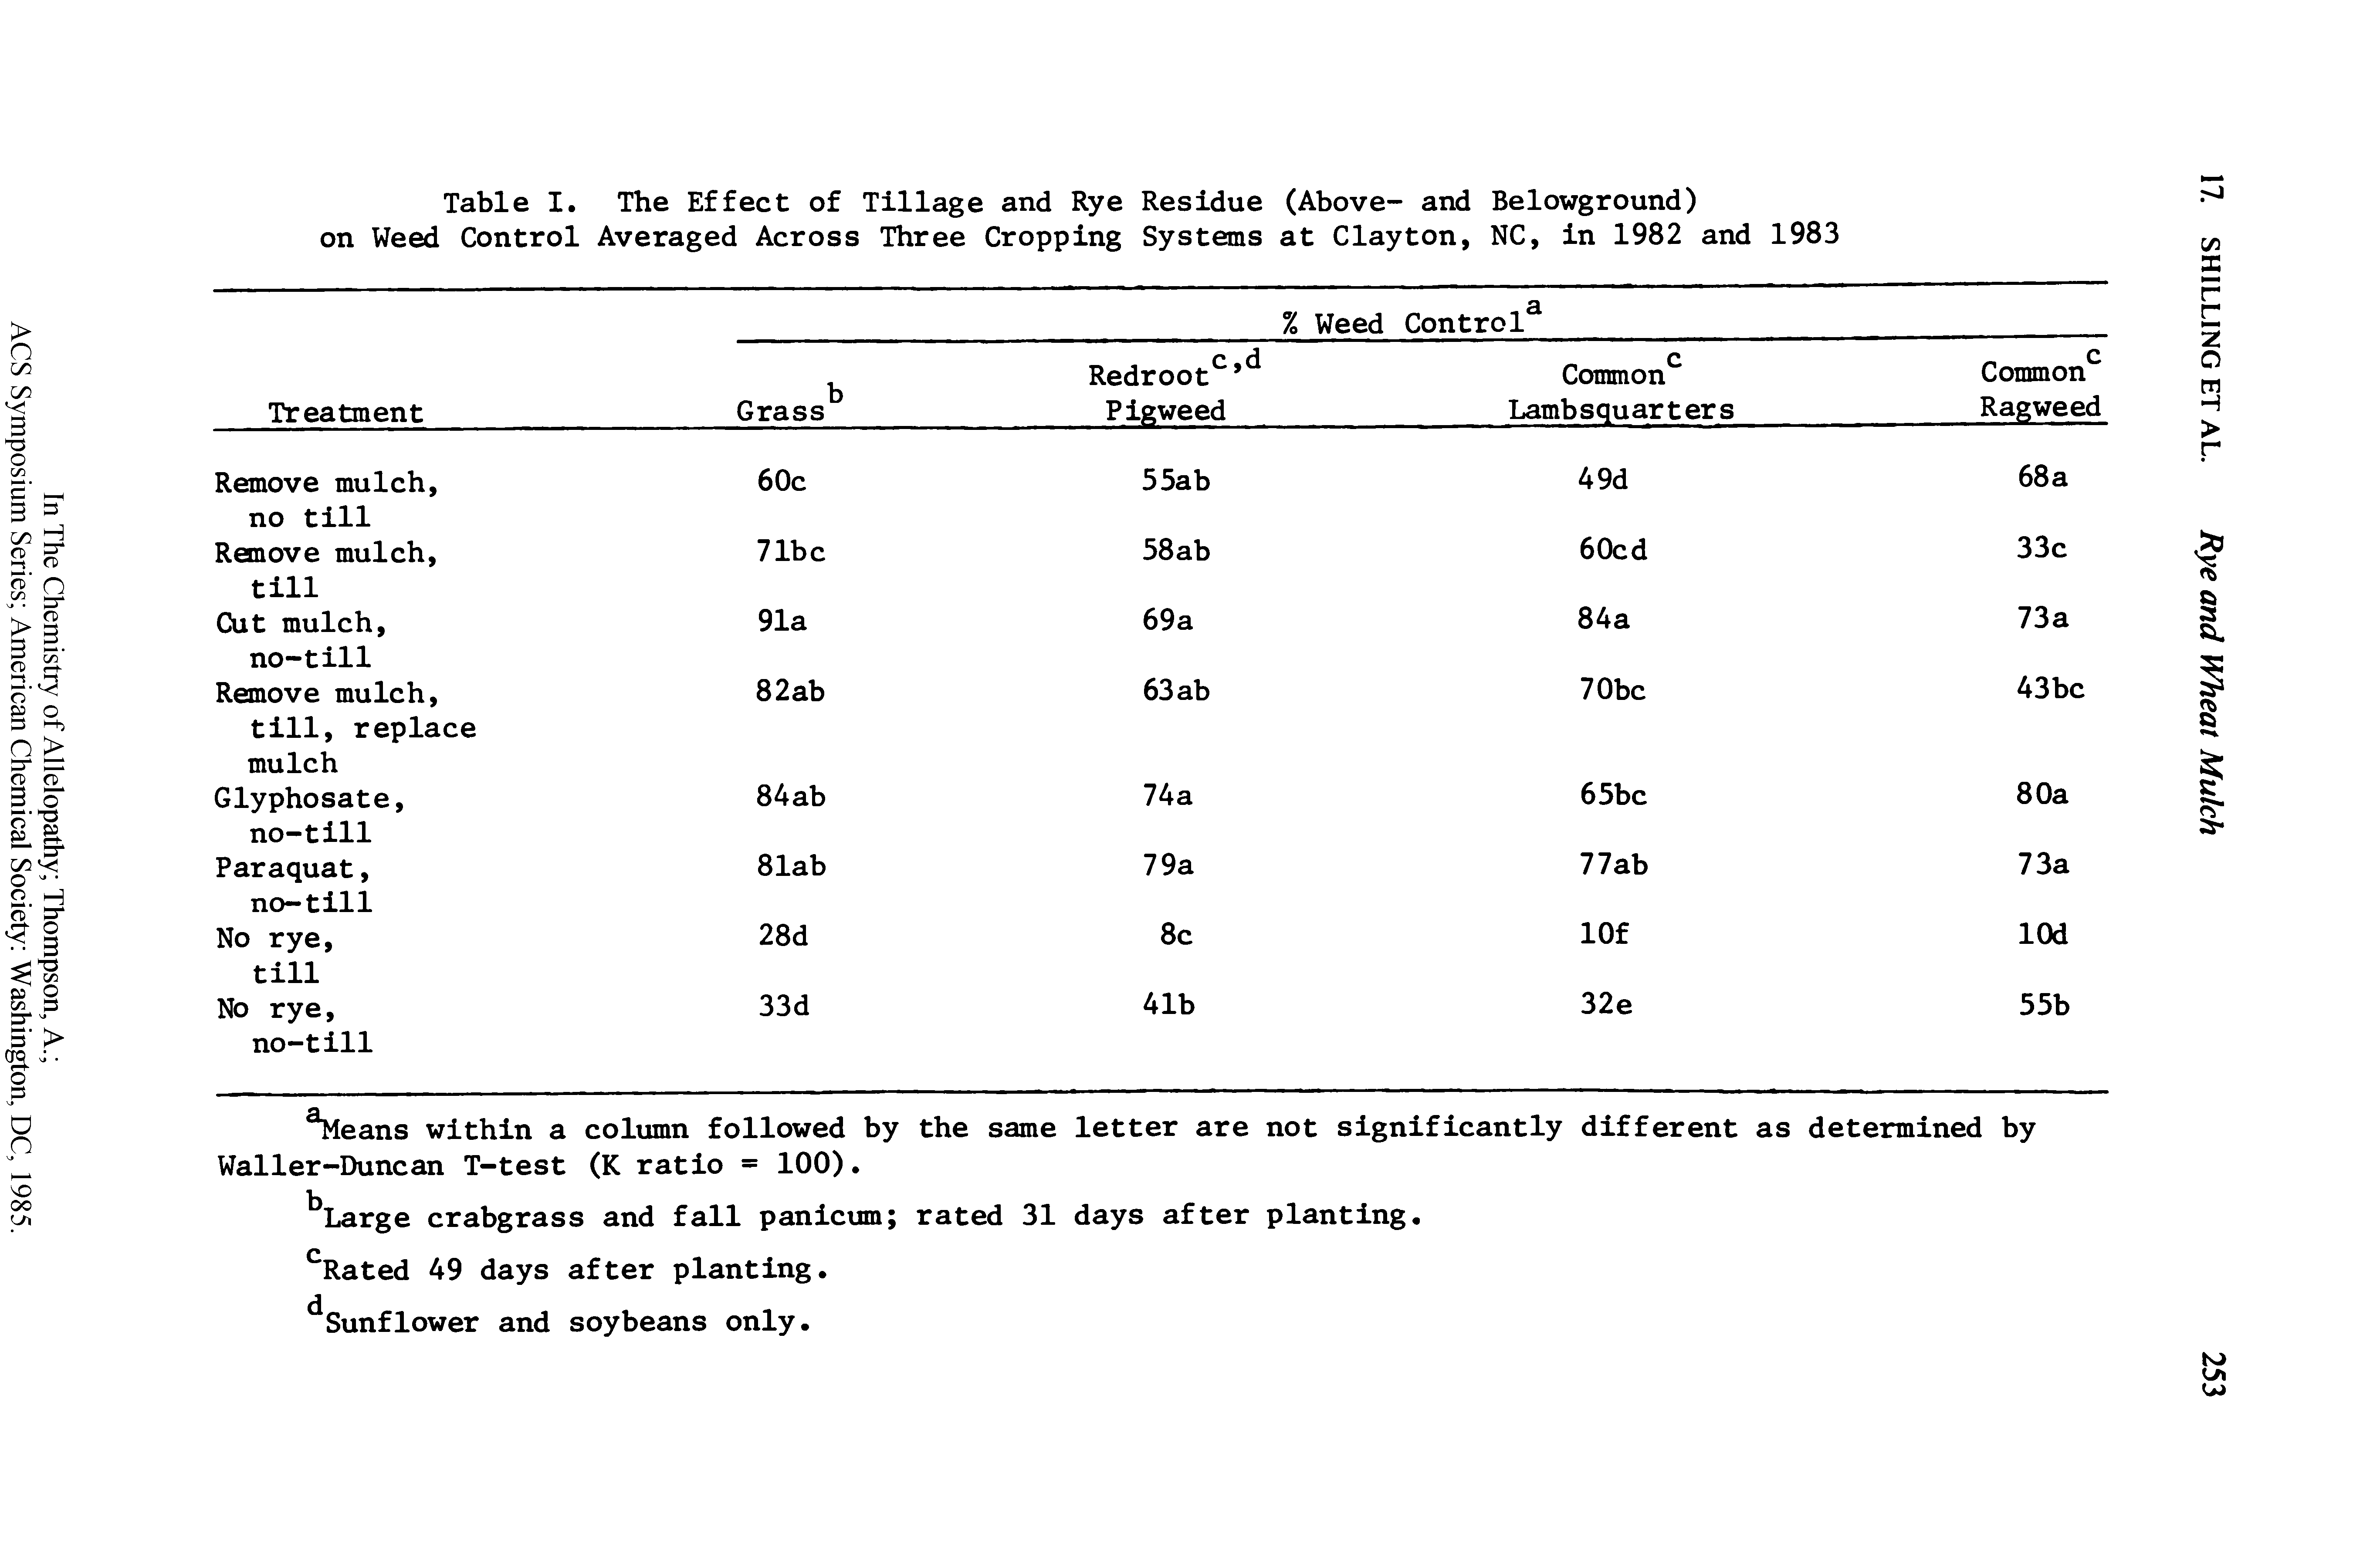 Table I. The Effect of Tillage and Rye Residue (Above- and Belowground) on Weed Control Averaged Across Three Cropping Systems at Clayton, NC, in 1982 and 1983...